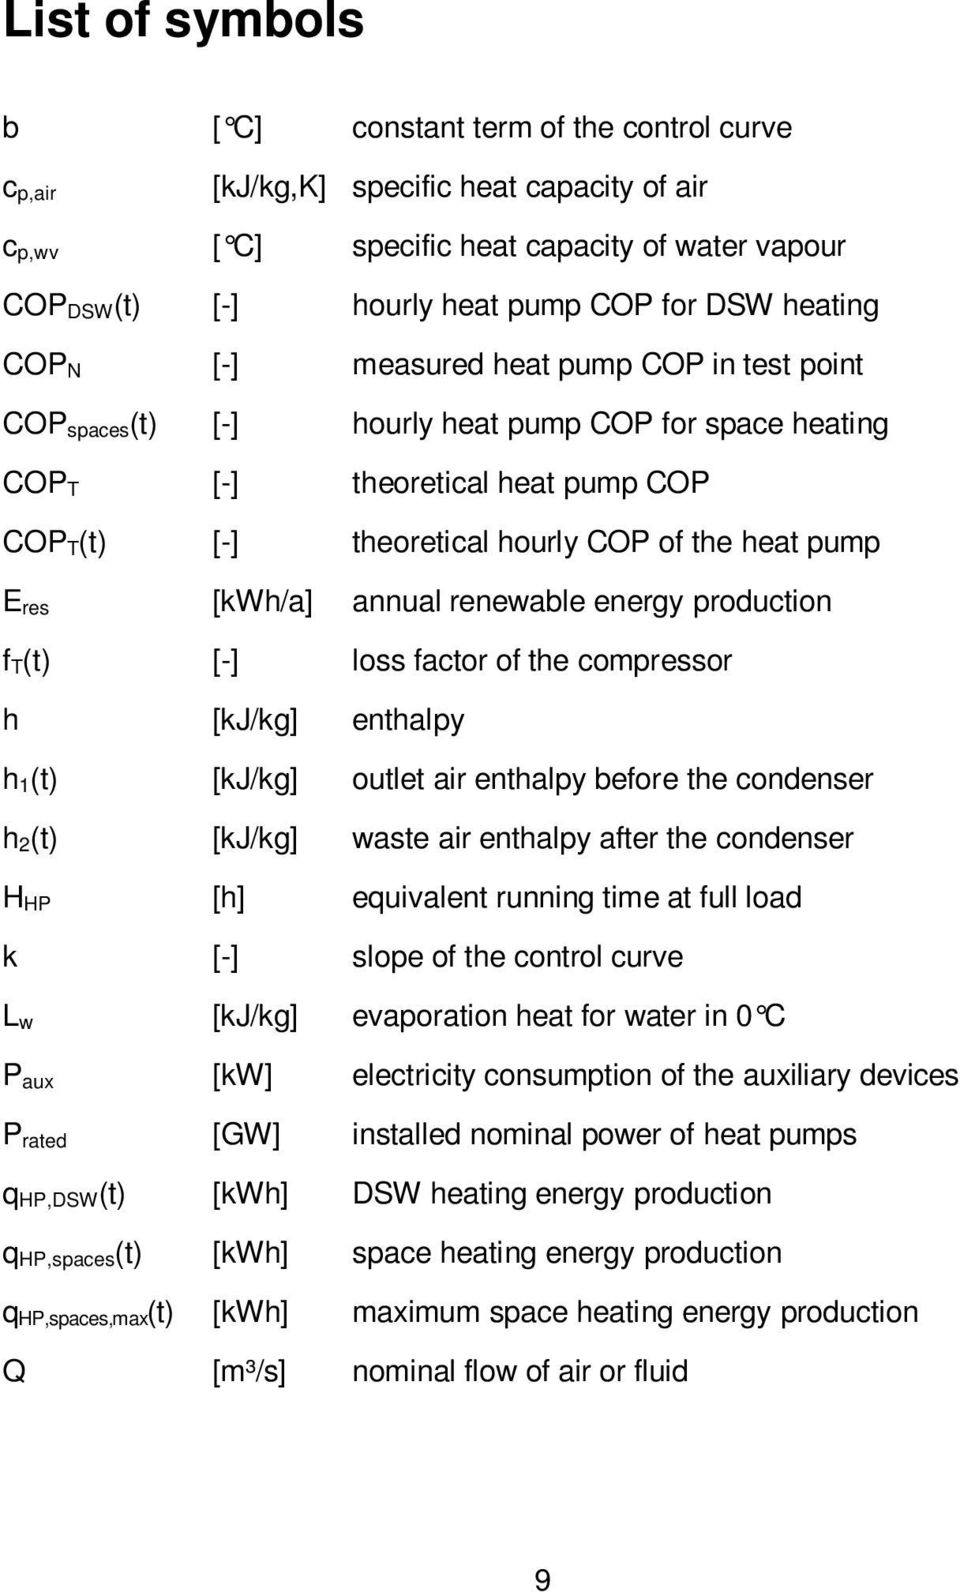 pump E res [kwh/a] annual renewable energy production f T(t) [-] loss factor of the compressor h [kj/kg] enthalpy h 1(t) [kj/kg] outlet air enthalpy before the condenser h 2(t) [kj/kg] waste air